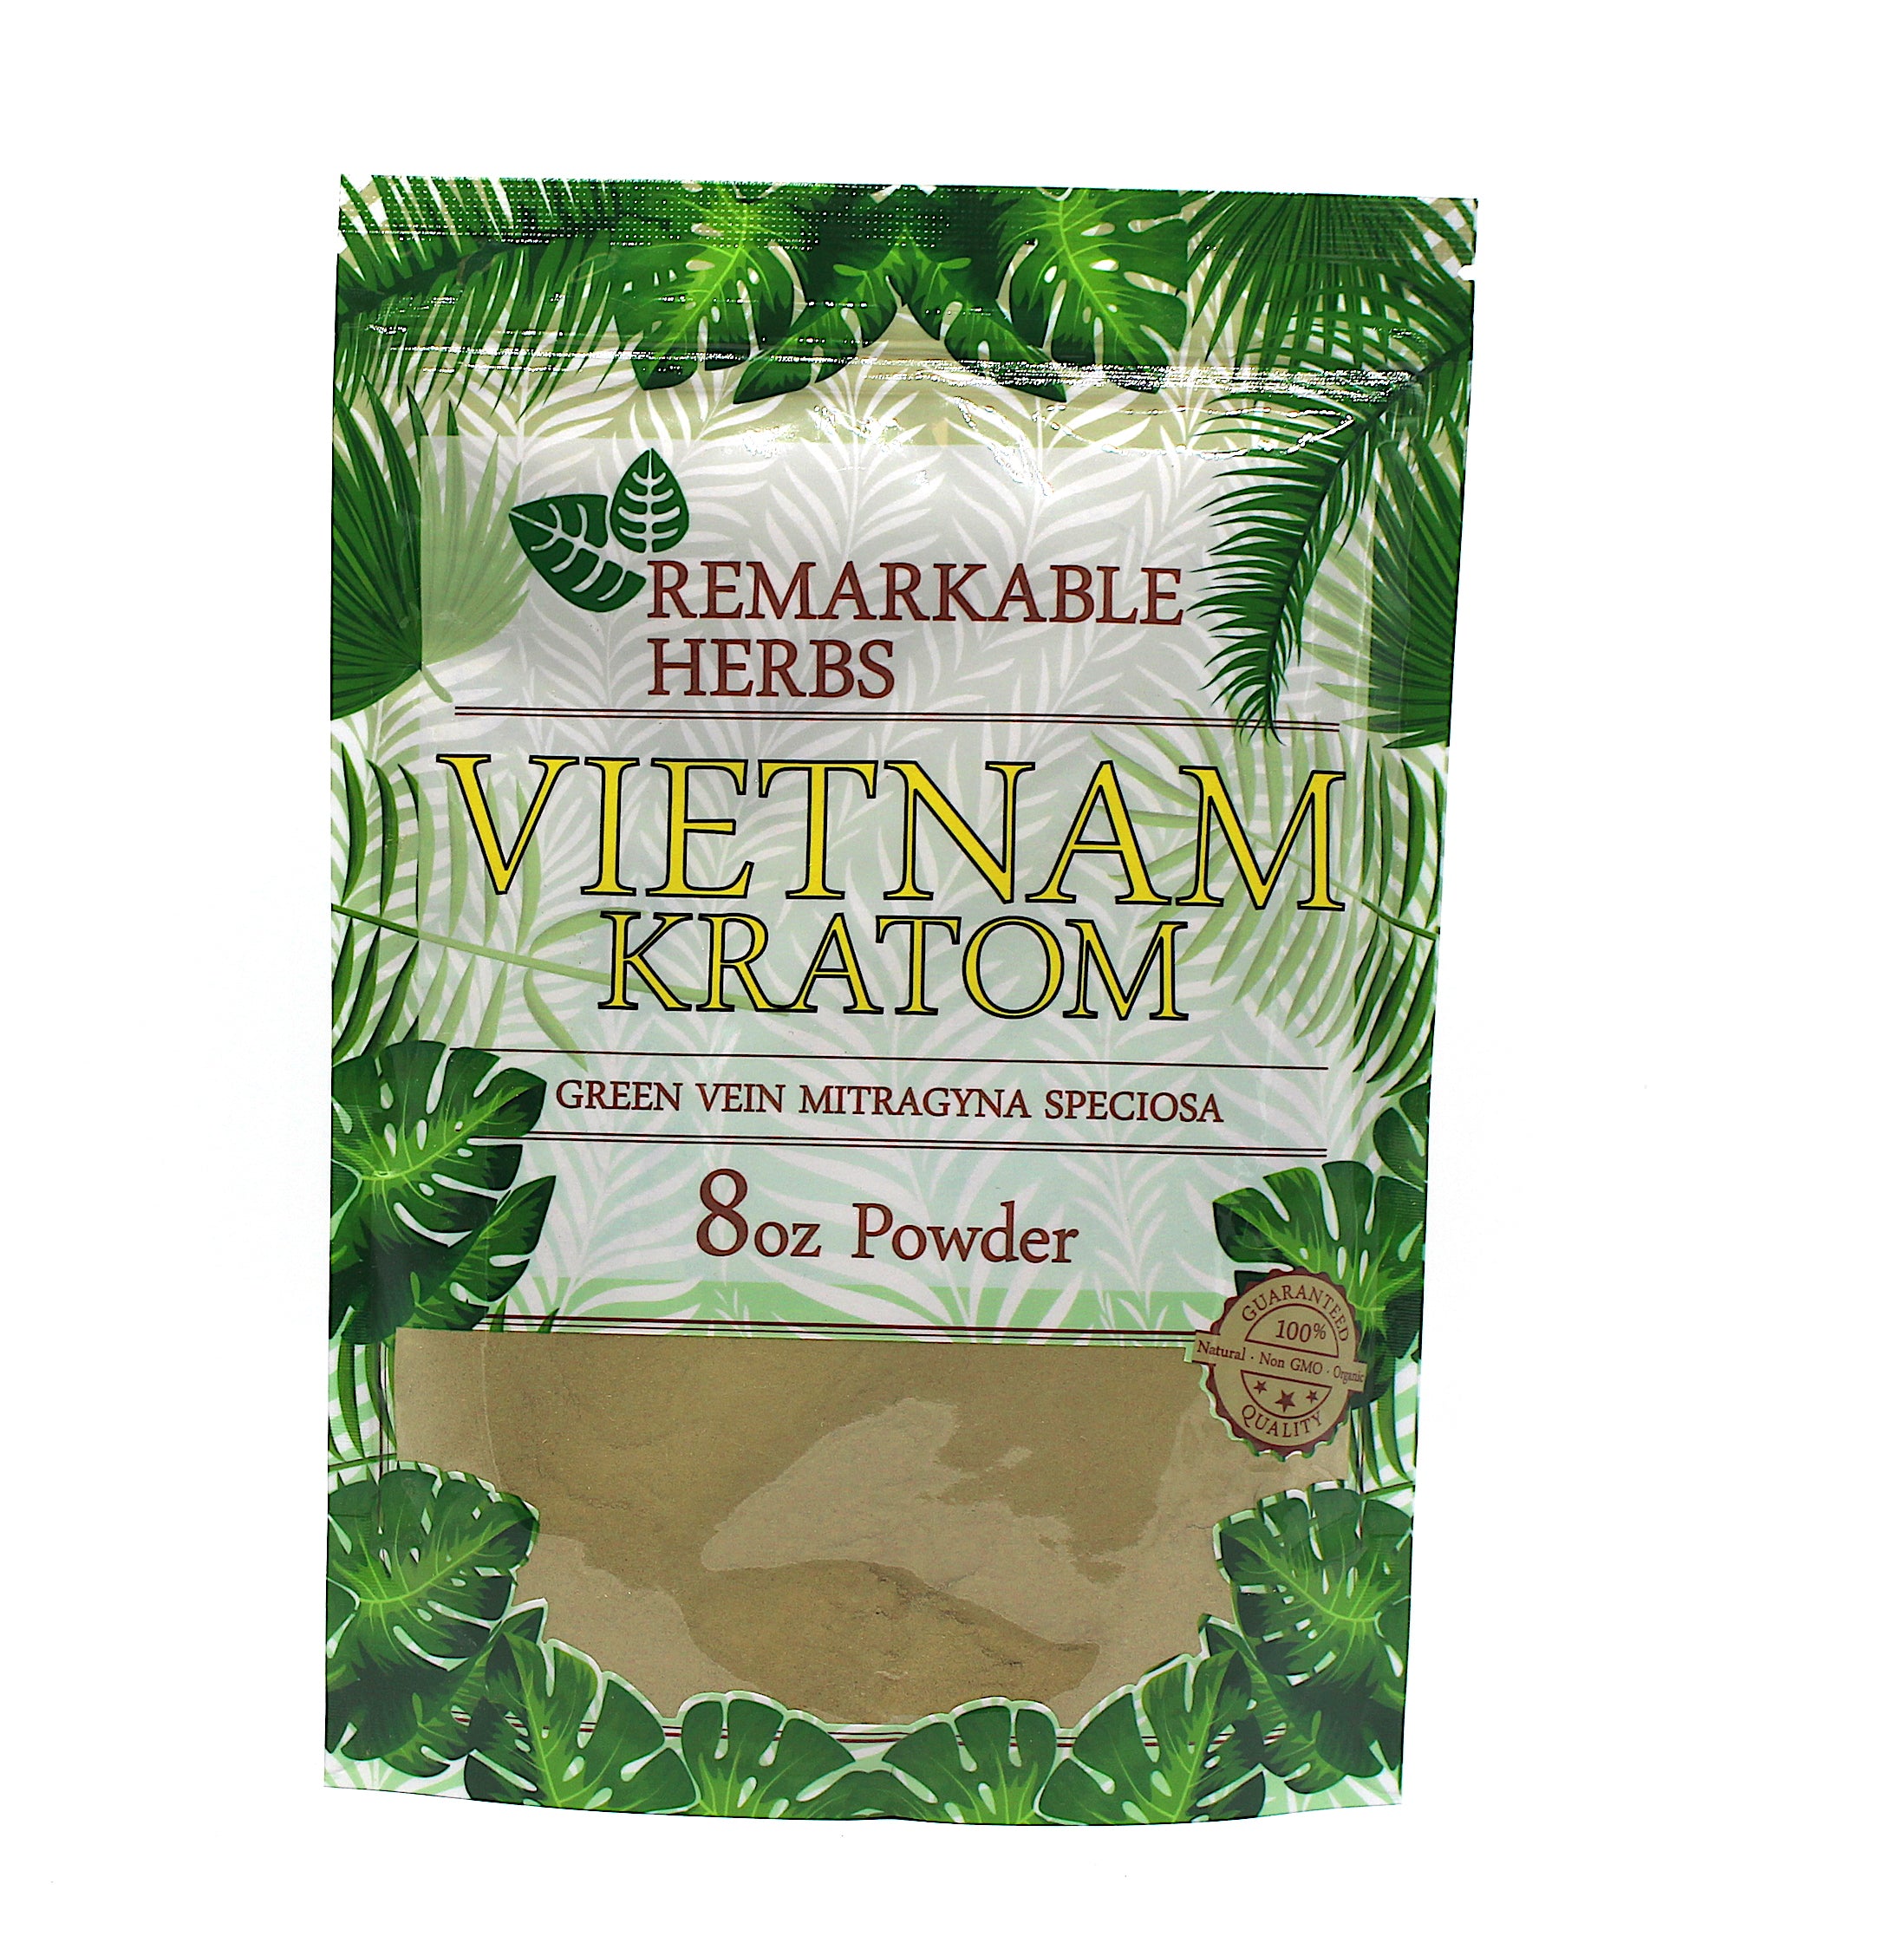 Remarkable Herbs 8oz